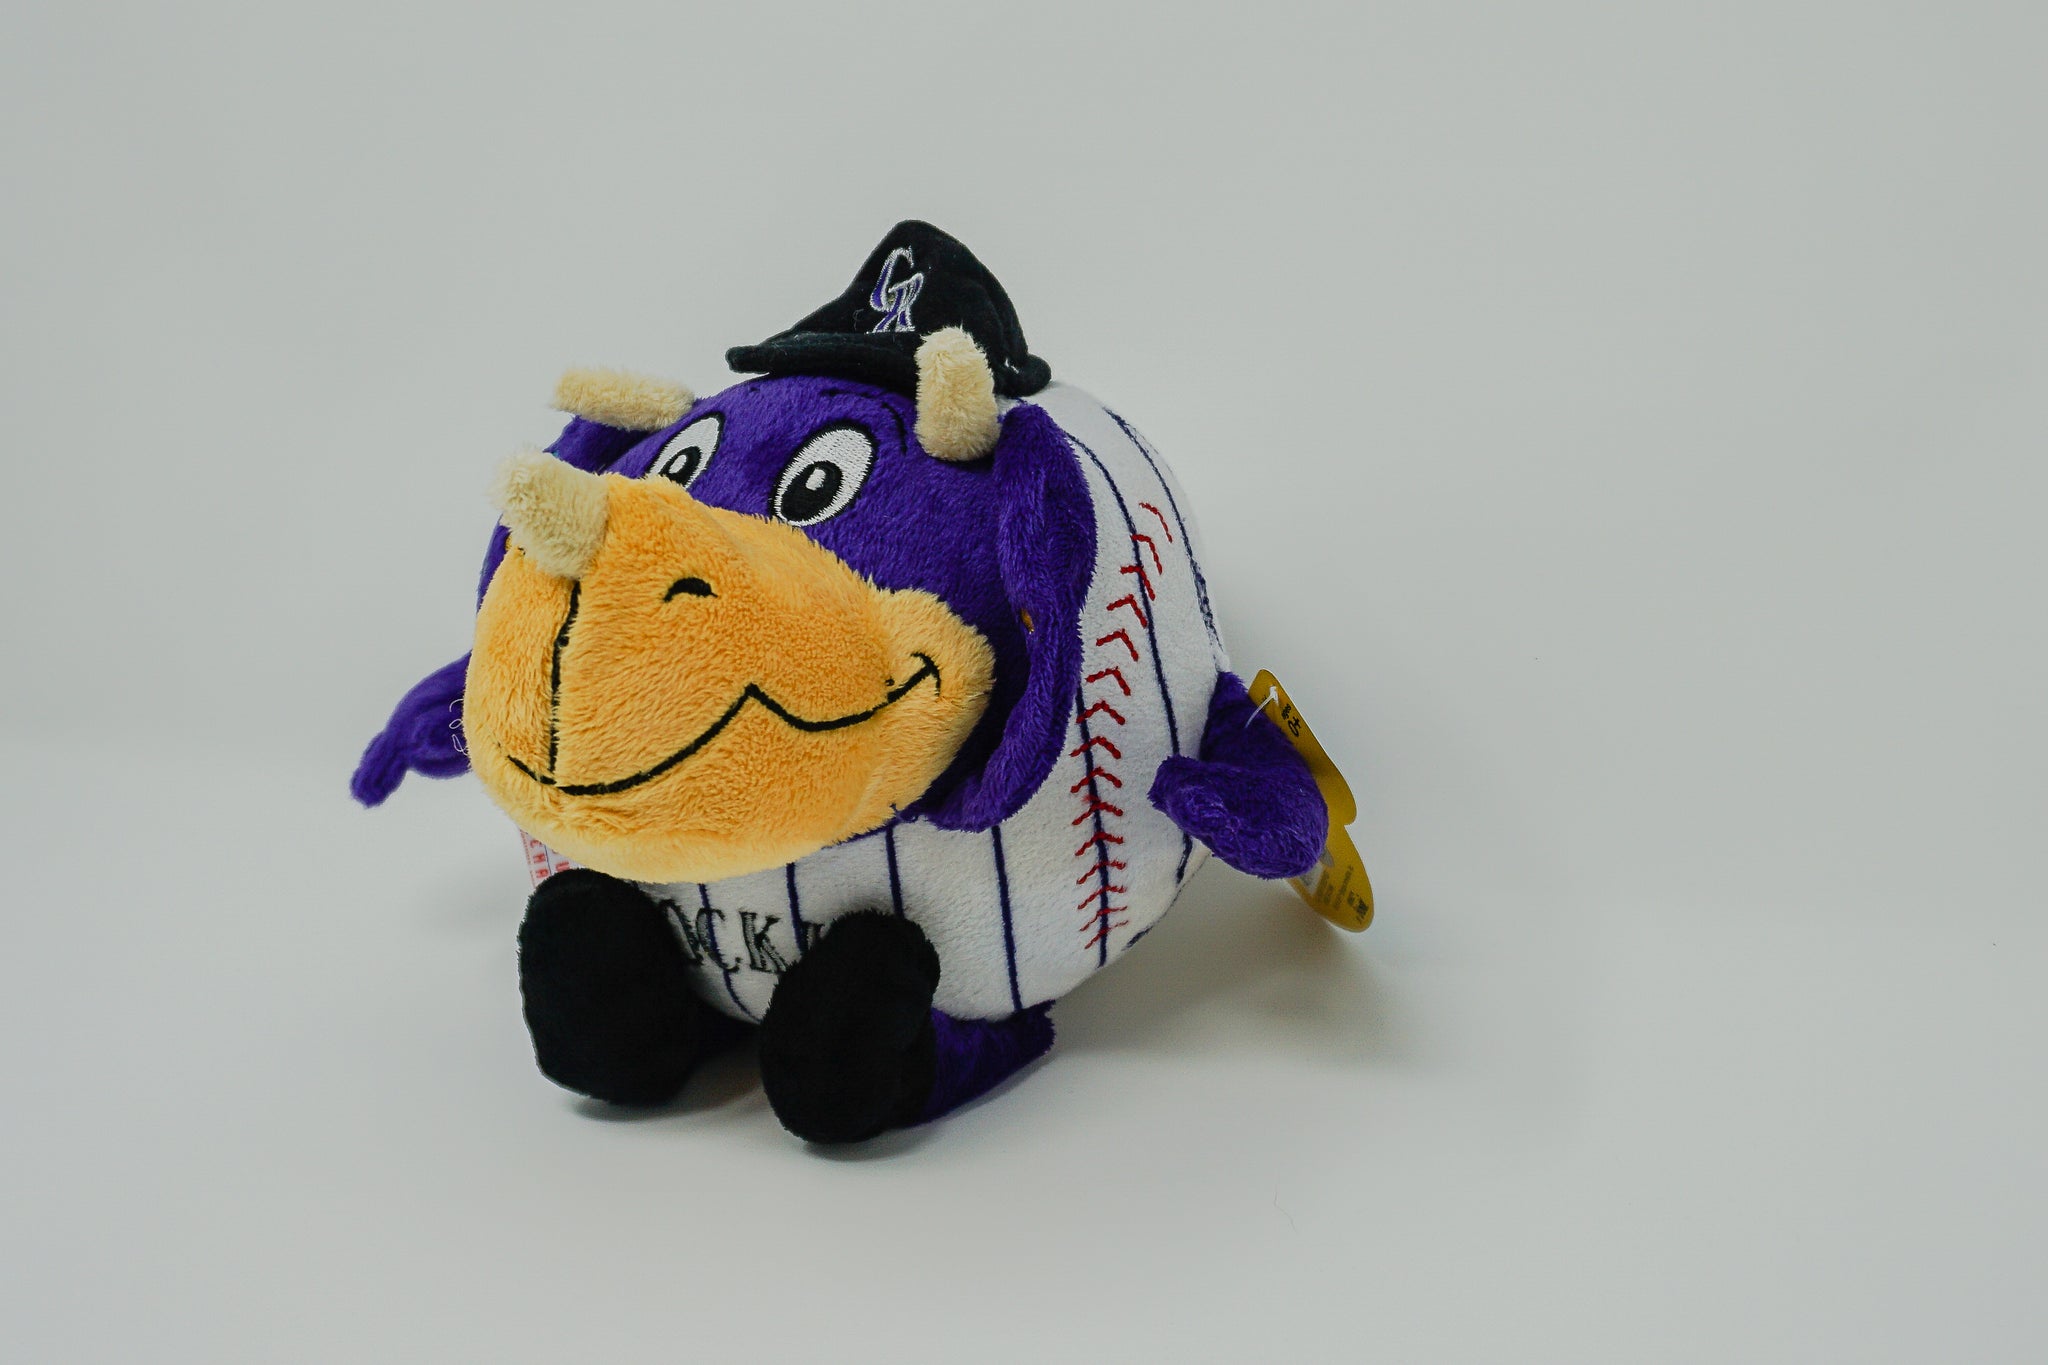 Colorado Rockies: Dinger 2021 Mascot - Officially Licensed MLB Removab